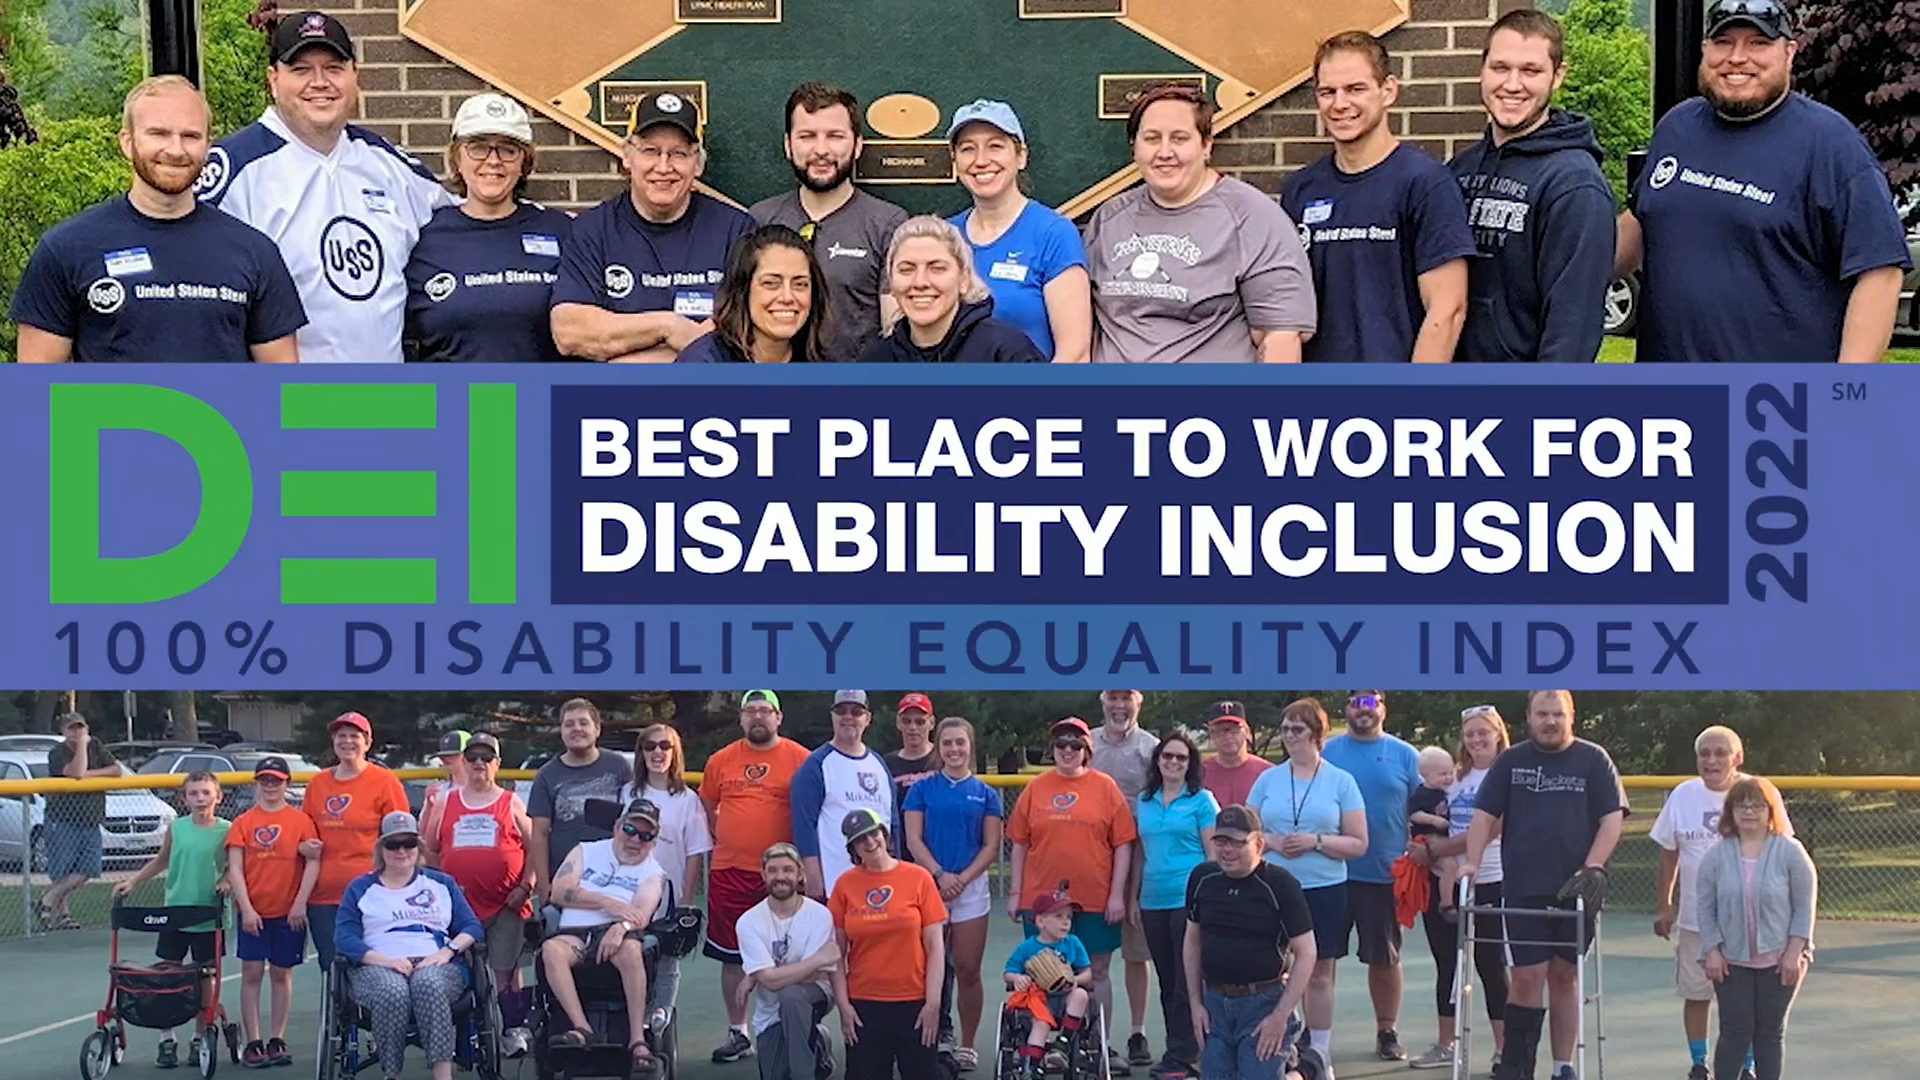 Learn more about our SteelABILITY employee resource group and U. S. Steel's diversity and inclusion program.